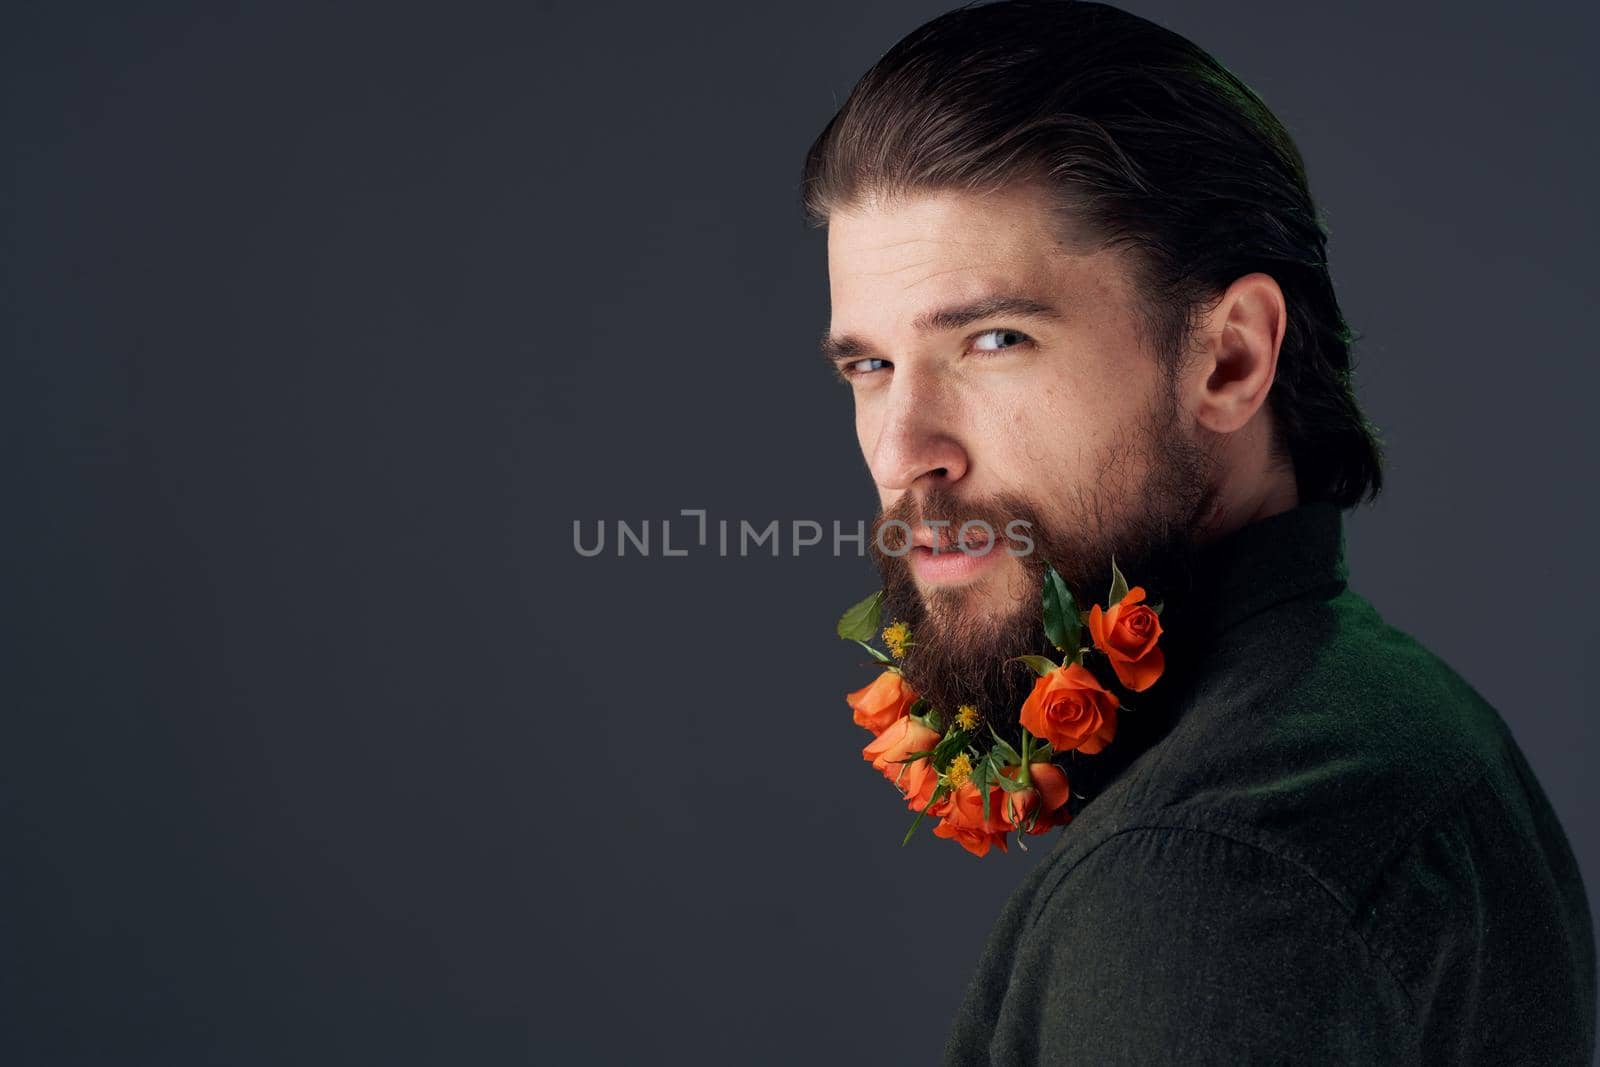 Cute man flowers in beard ornaments elegant style close-up. High quality photo